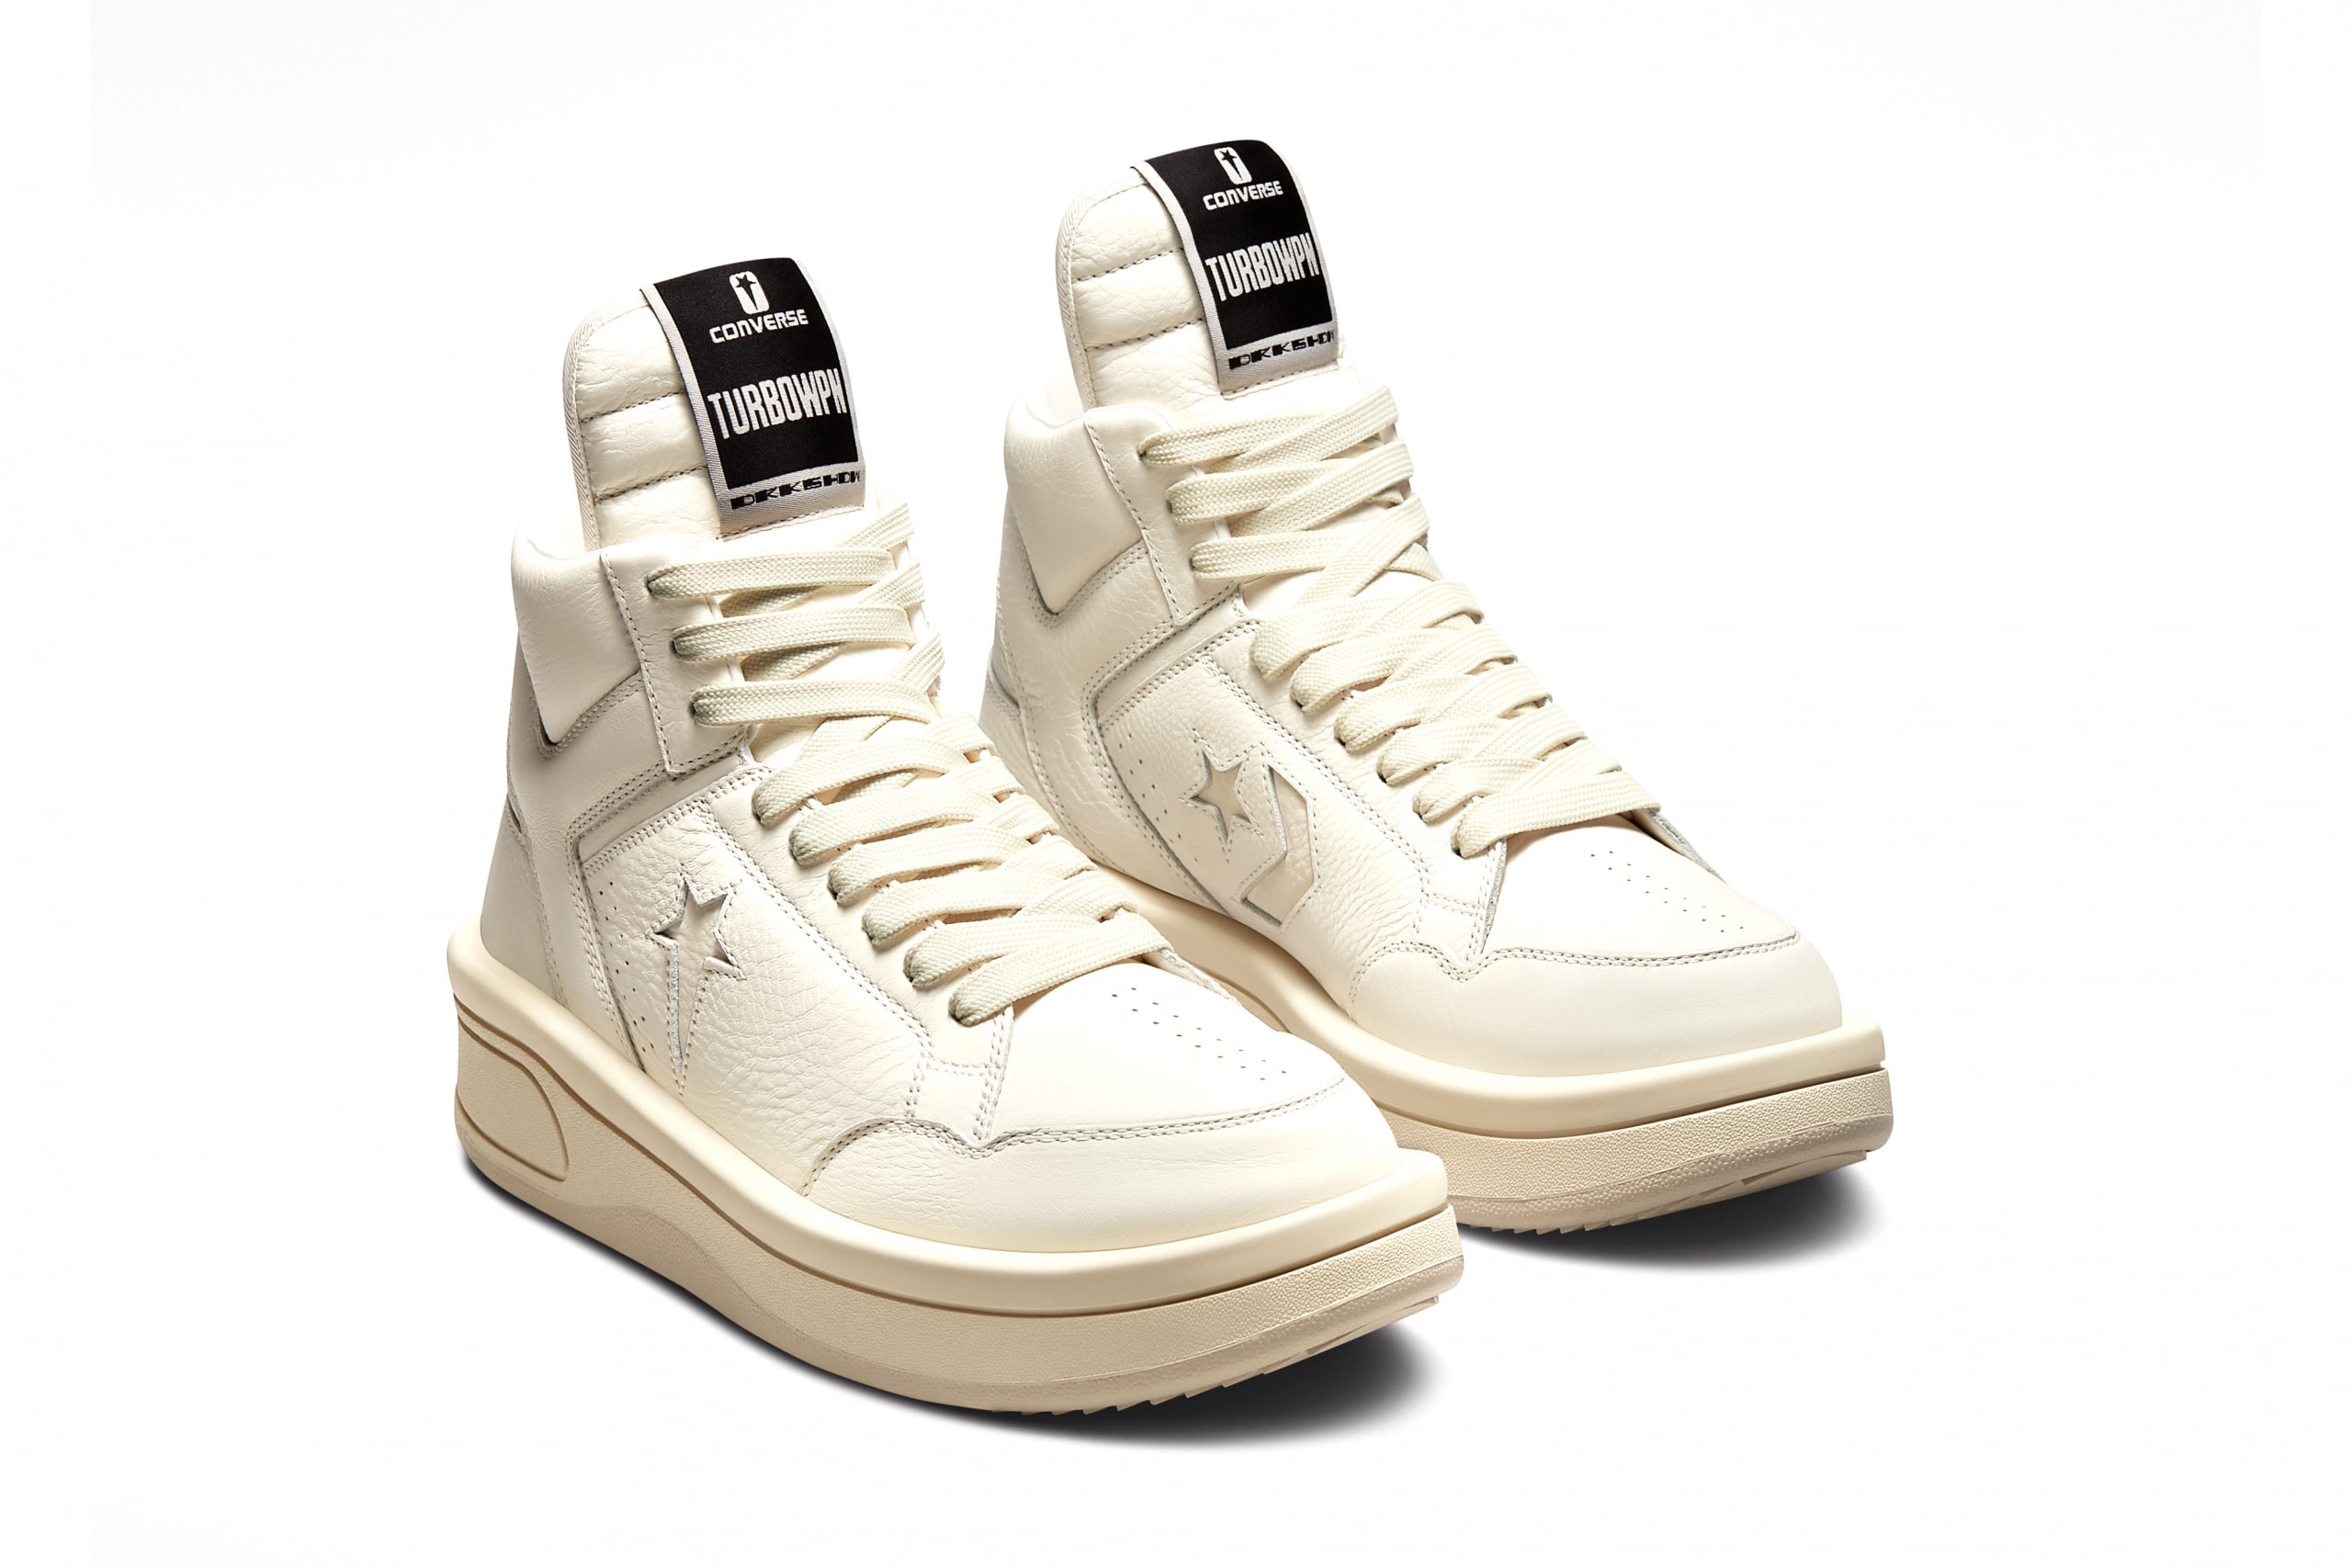 Rick Owens DRKSHDW x Converse Revisit the Bulky TURBOWPN Sneakers clay egret colorways leather platform soles weapon release info date price